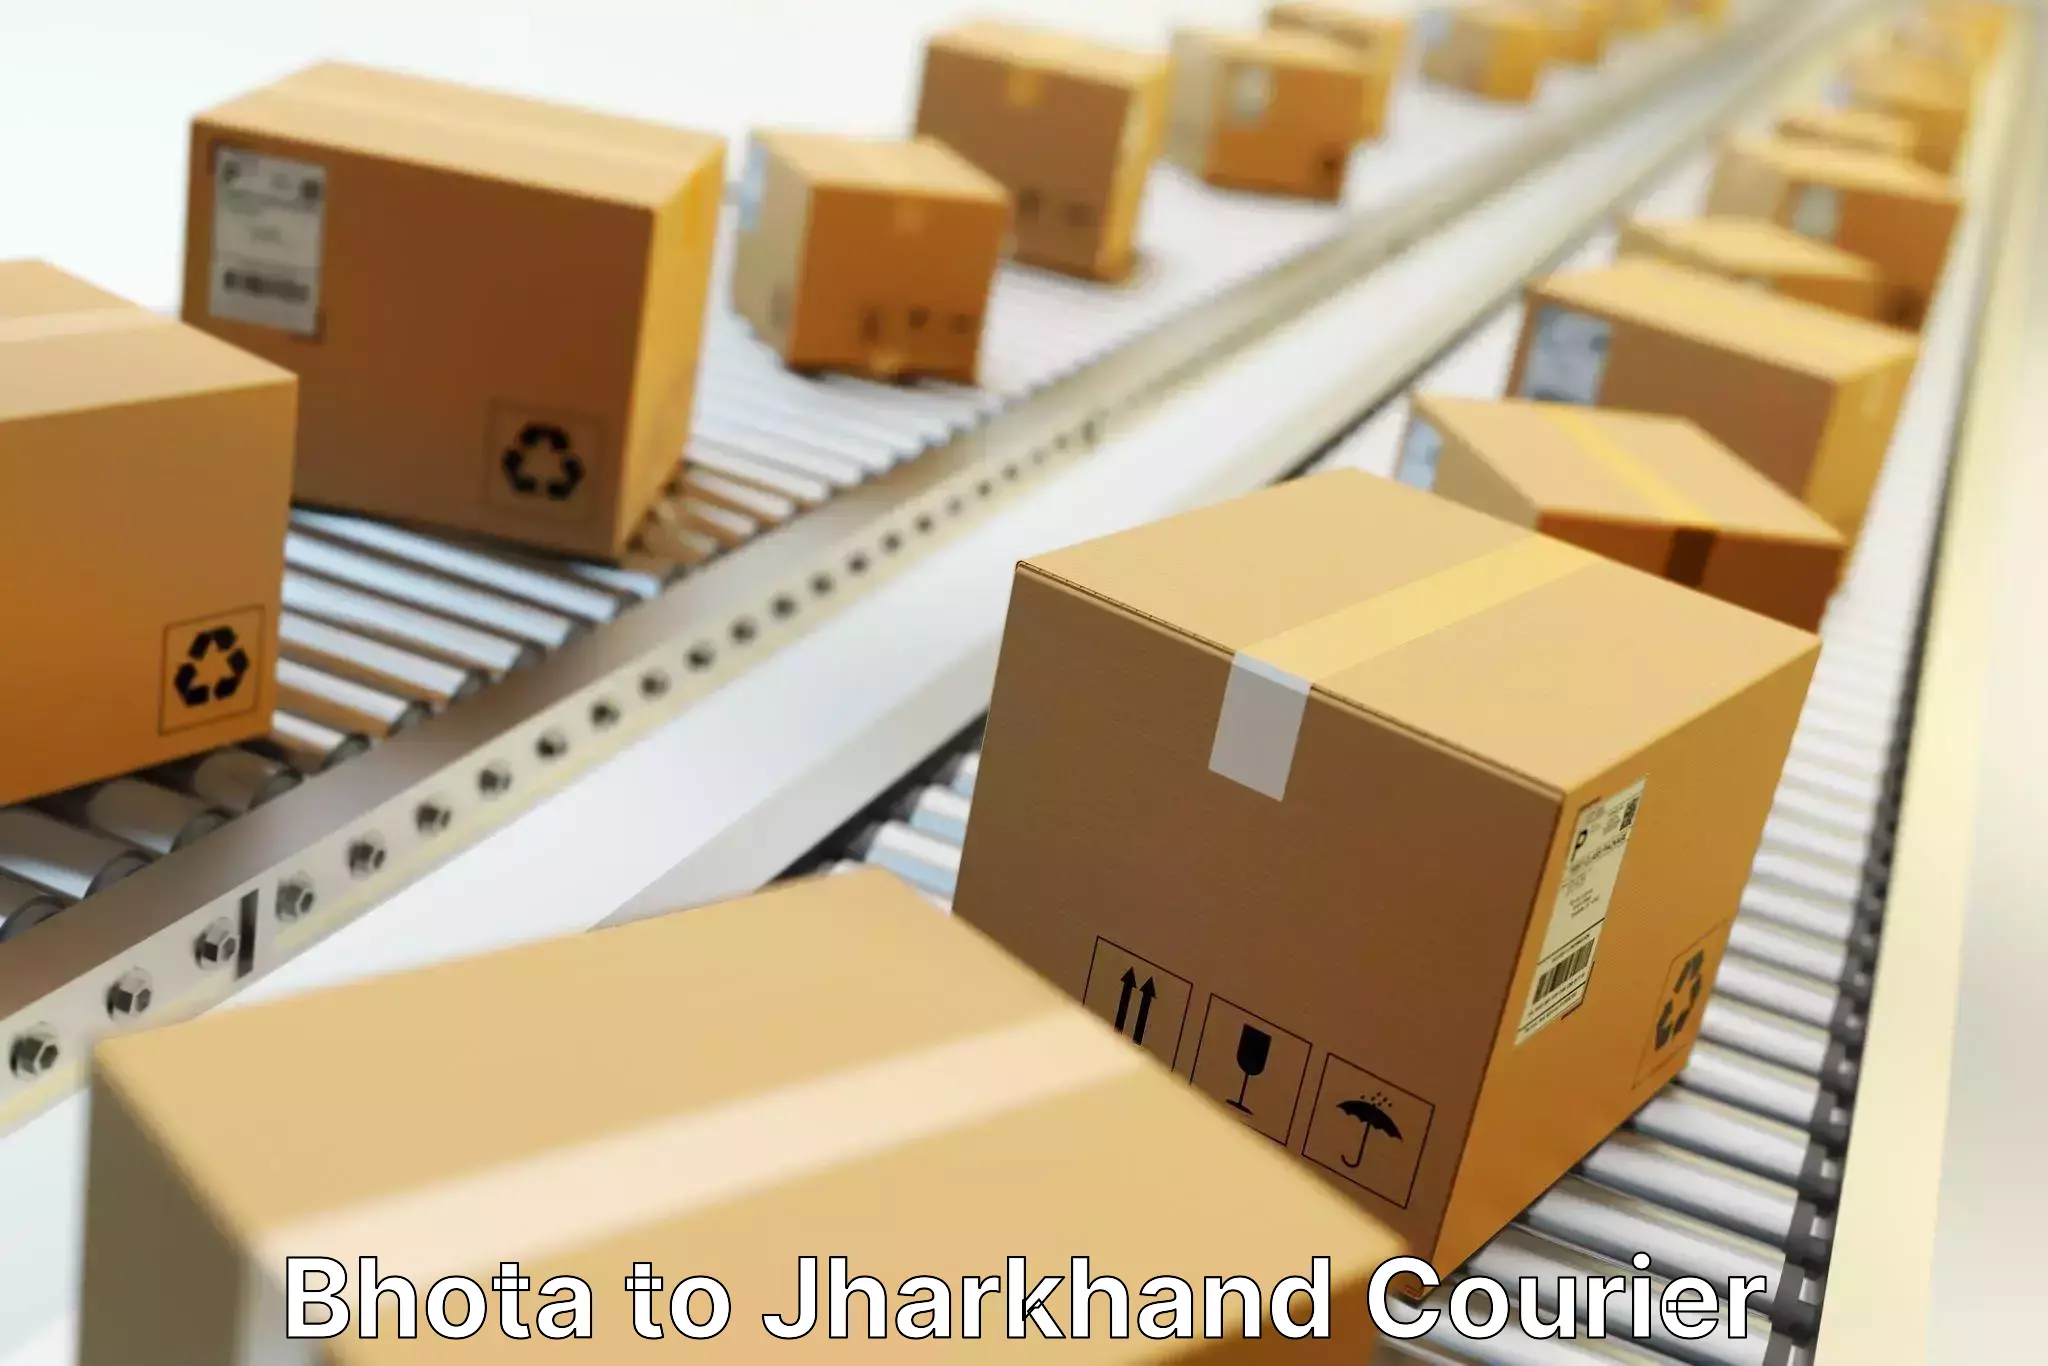 Parcel handling and care Bhota to Jharkhand